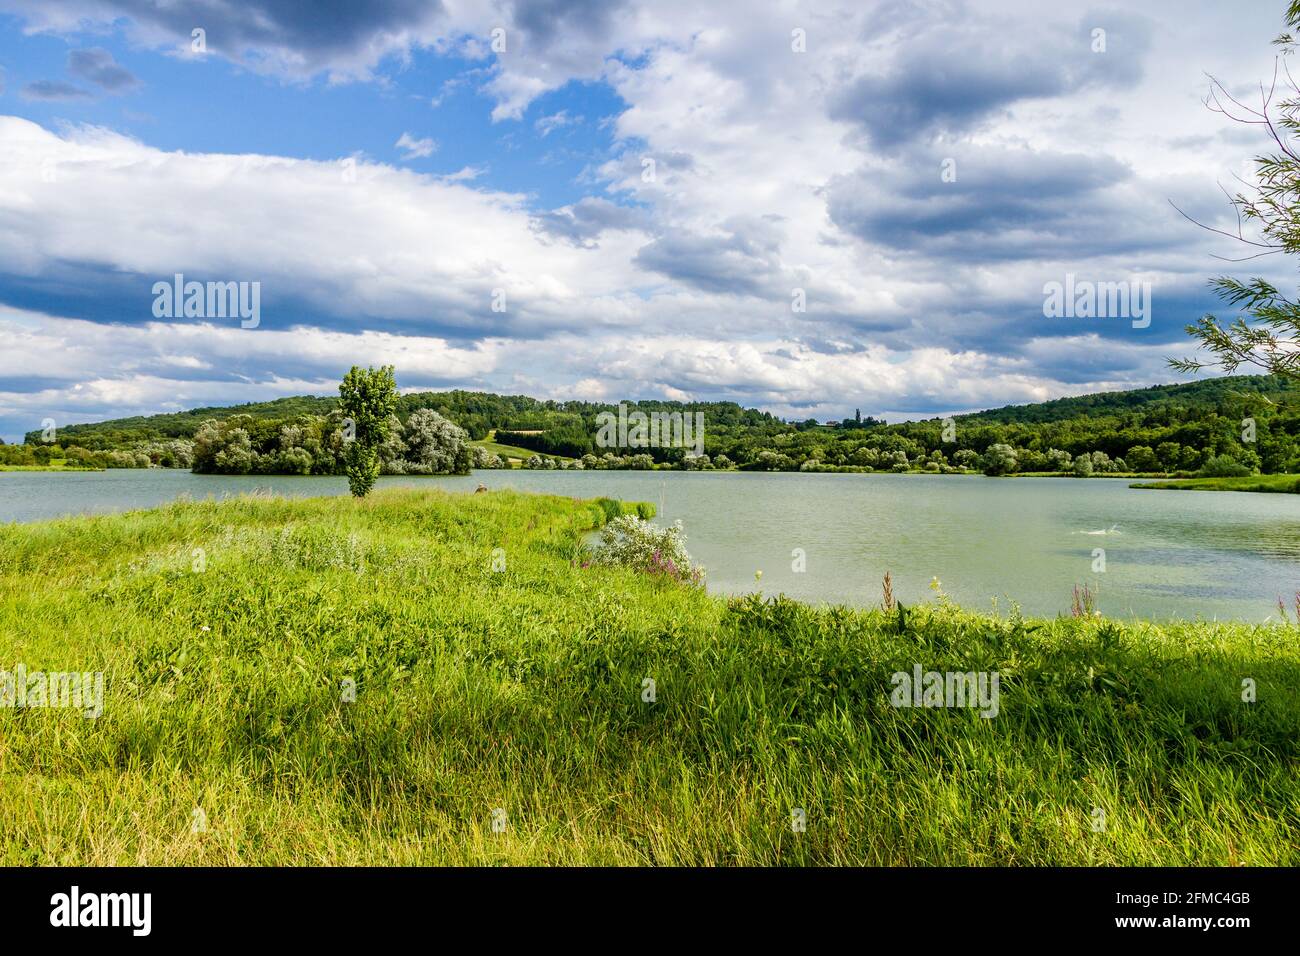 Series of beautiful views on Rauchwart lake in a suny day, Burgenland, Austria. Stock Photo